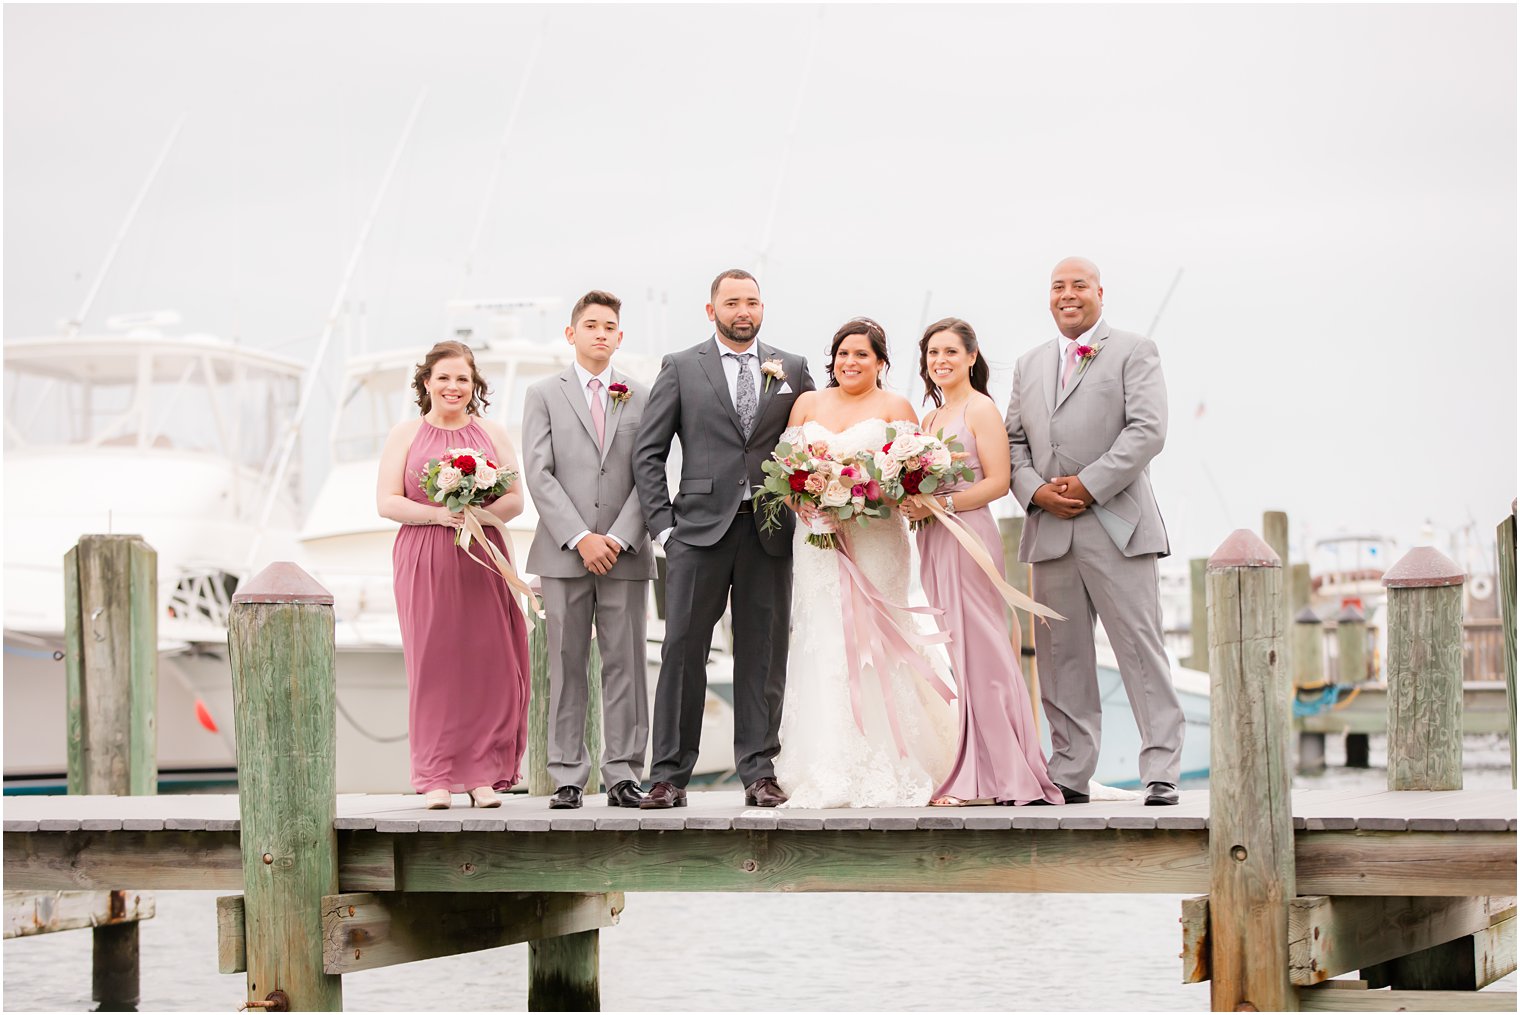 Bridal party at Clarks Landing photographed by Idalia Photography